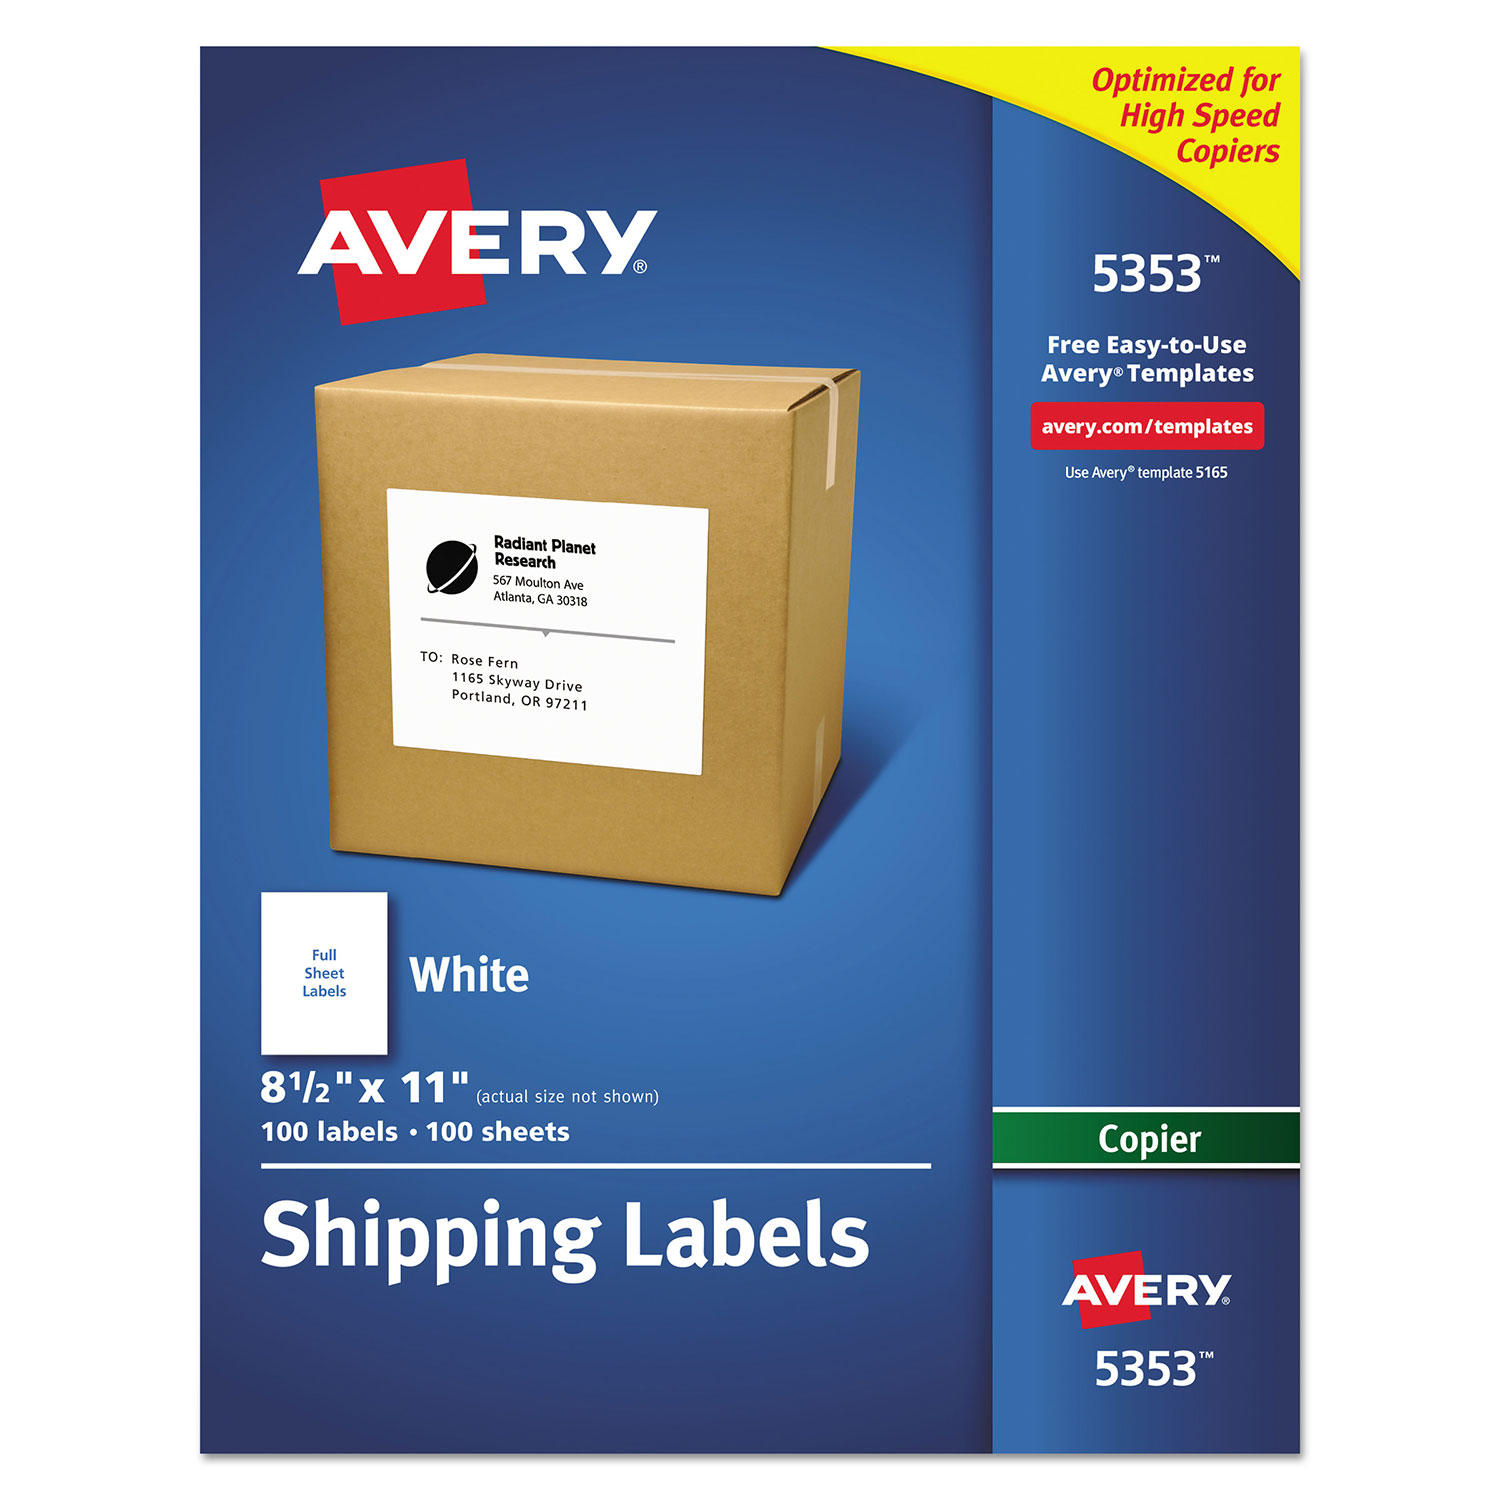 Avery 5353 - Copier Full Sheet Labels, 8-1/2 x 11', White - 100 Labels